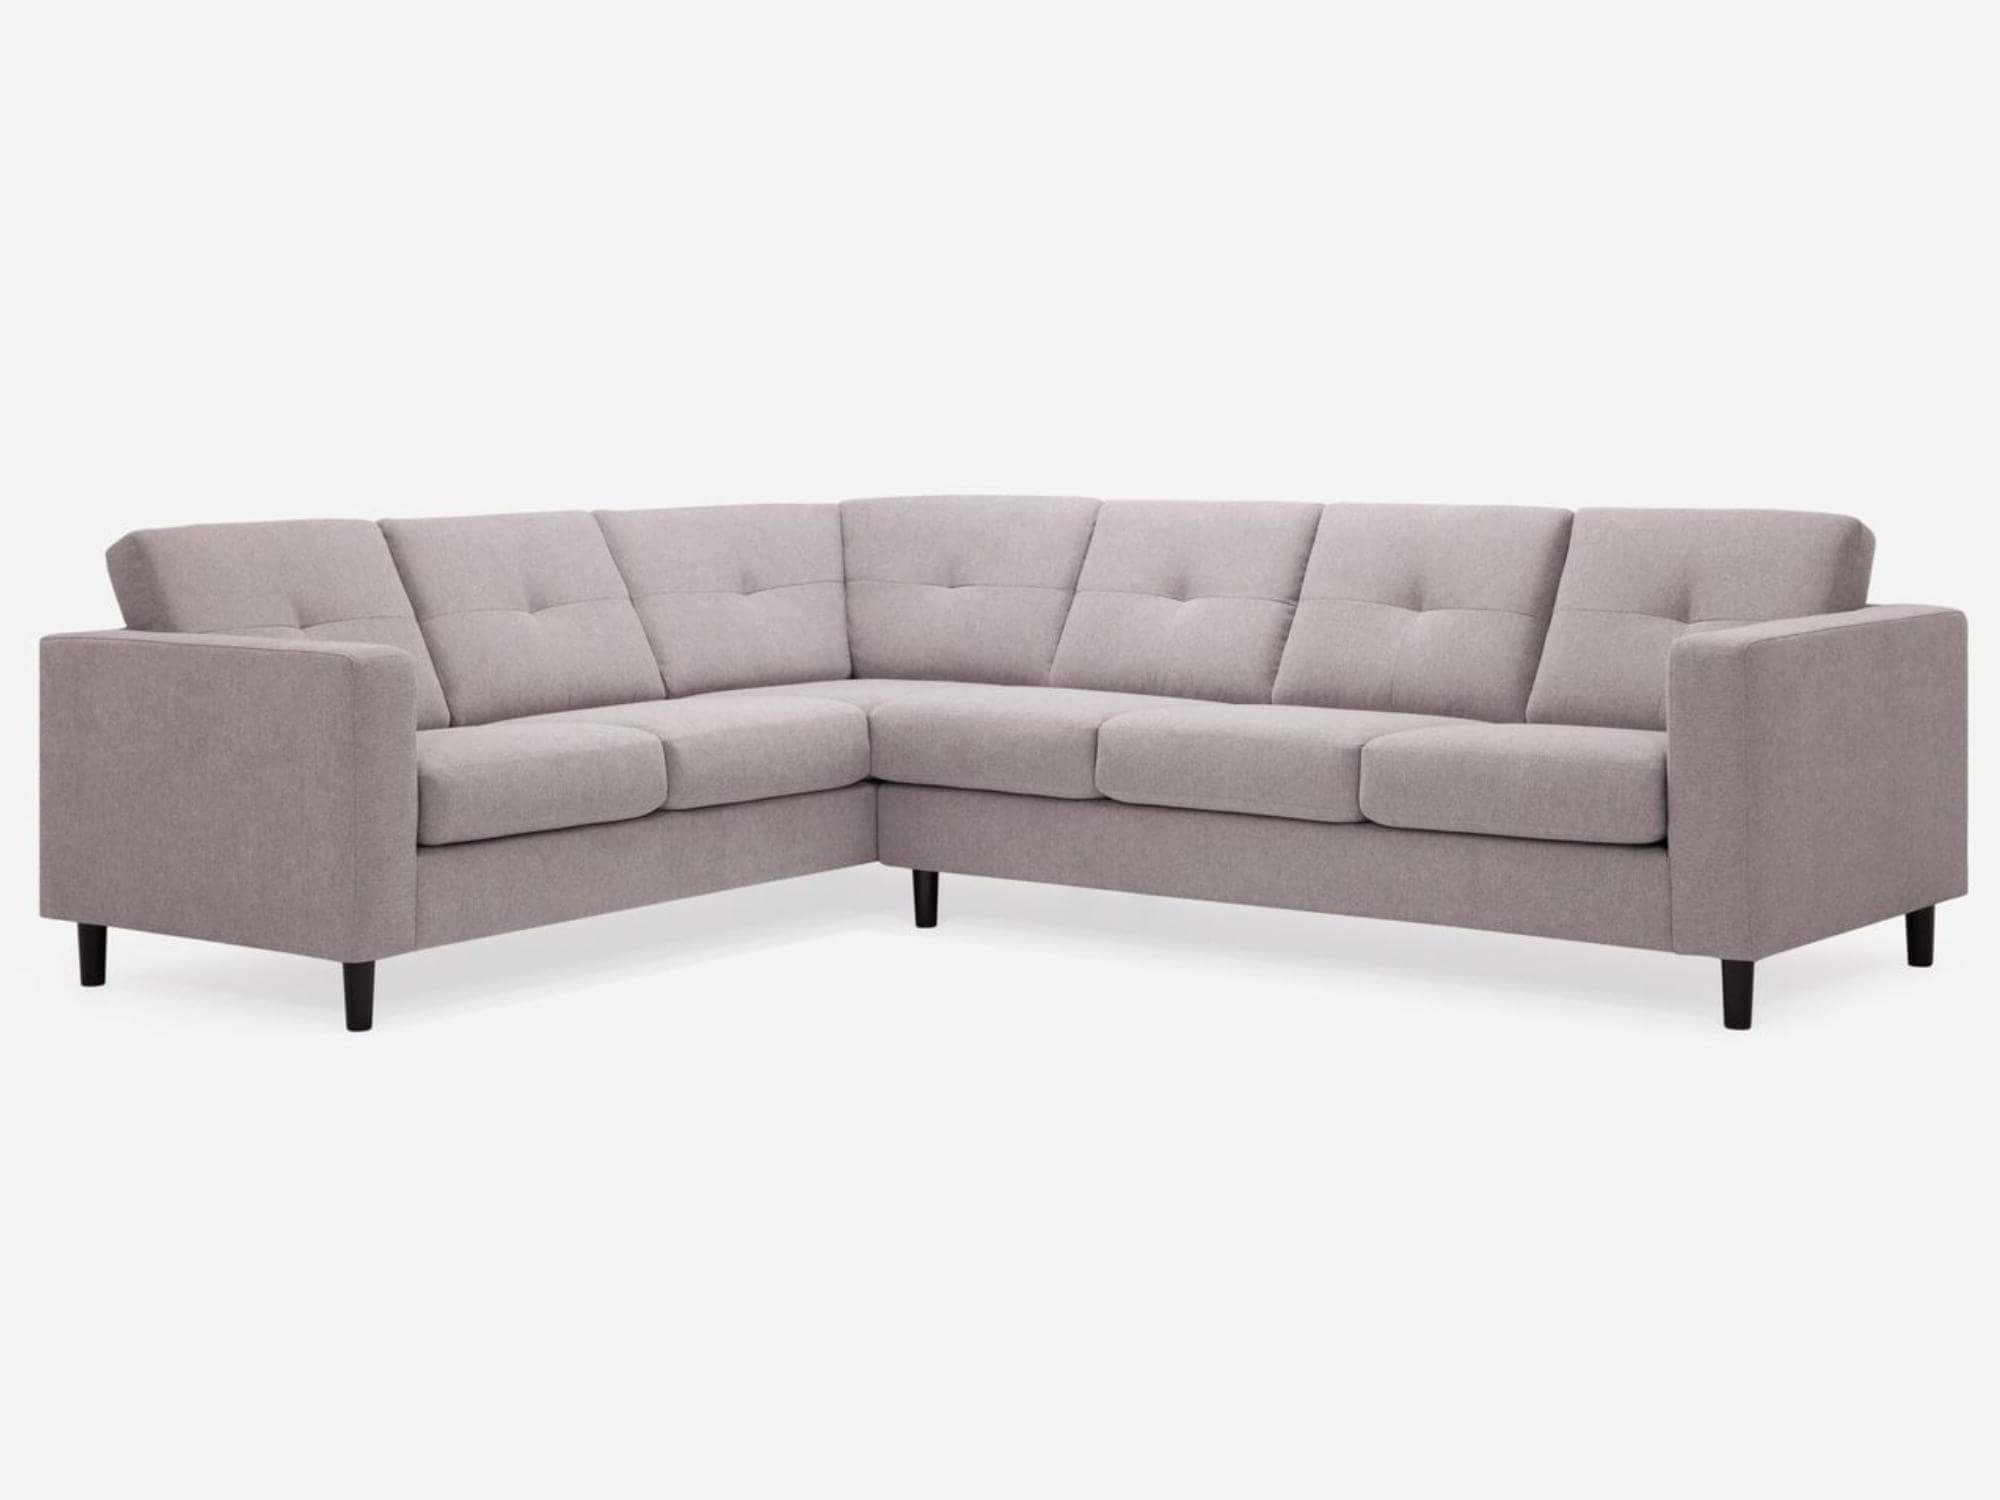 Solo Sectional Sofa | Black Fabric Or Grey Leather Sectional Within 6 Seater Sectional Couches (Gallery 3 of 20)